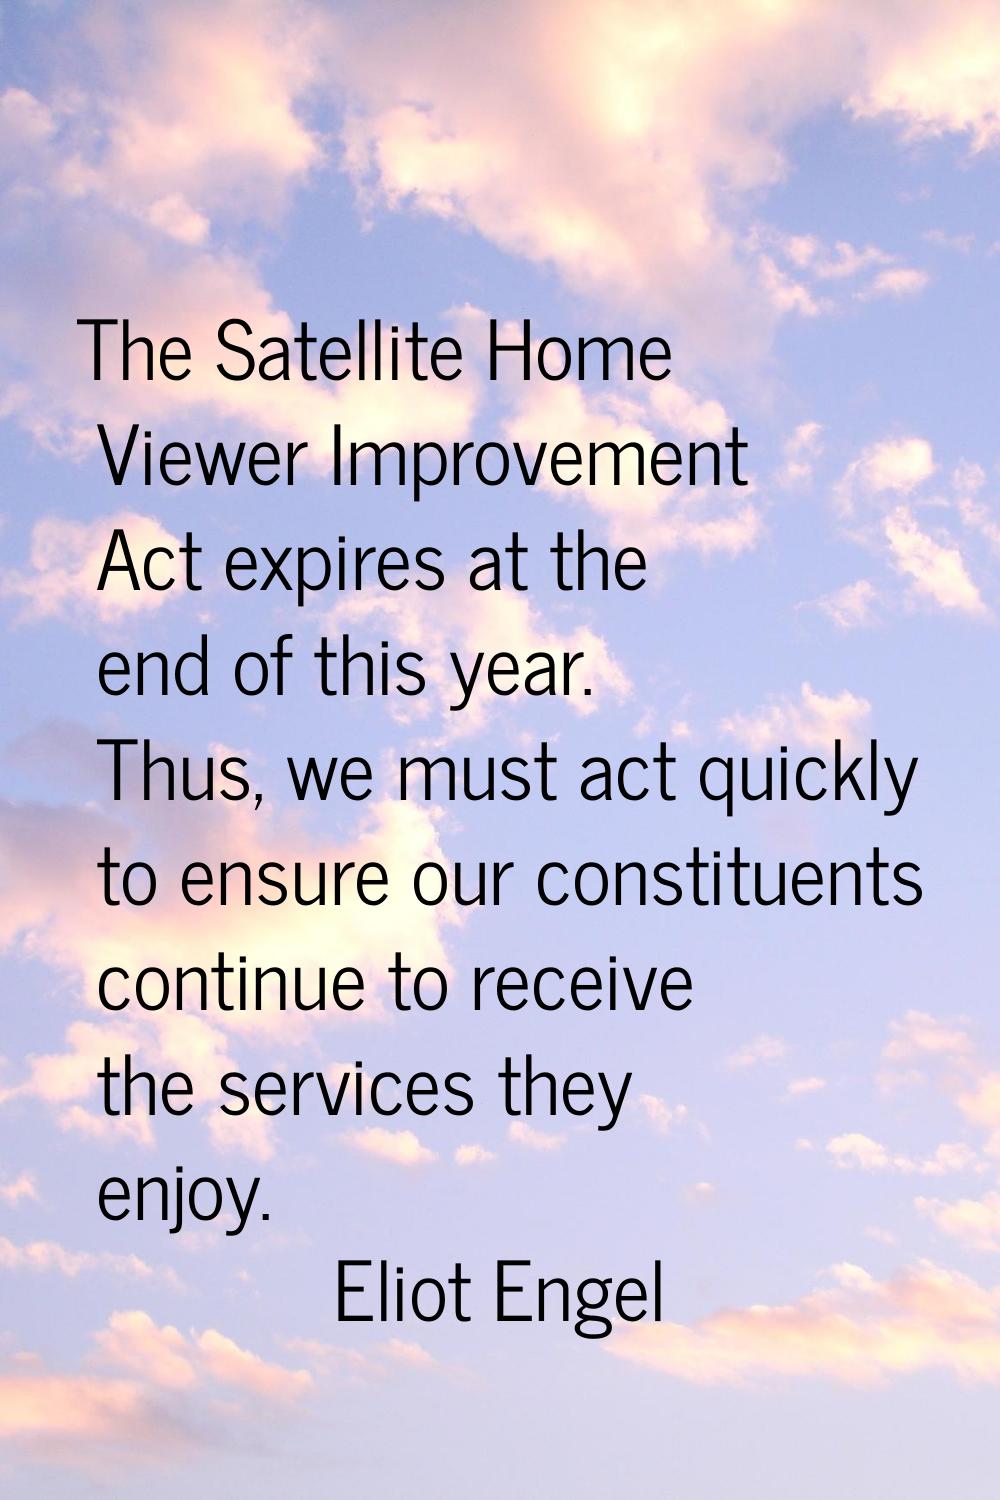 The Satellite Home Viewer Improvement Act expires at the end of this year. Thus, we must act quickl